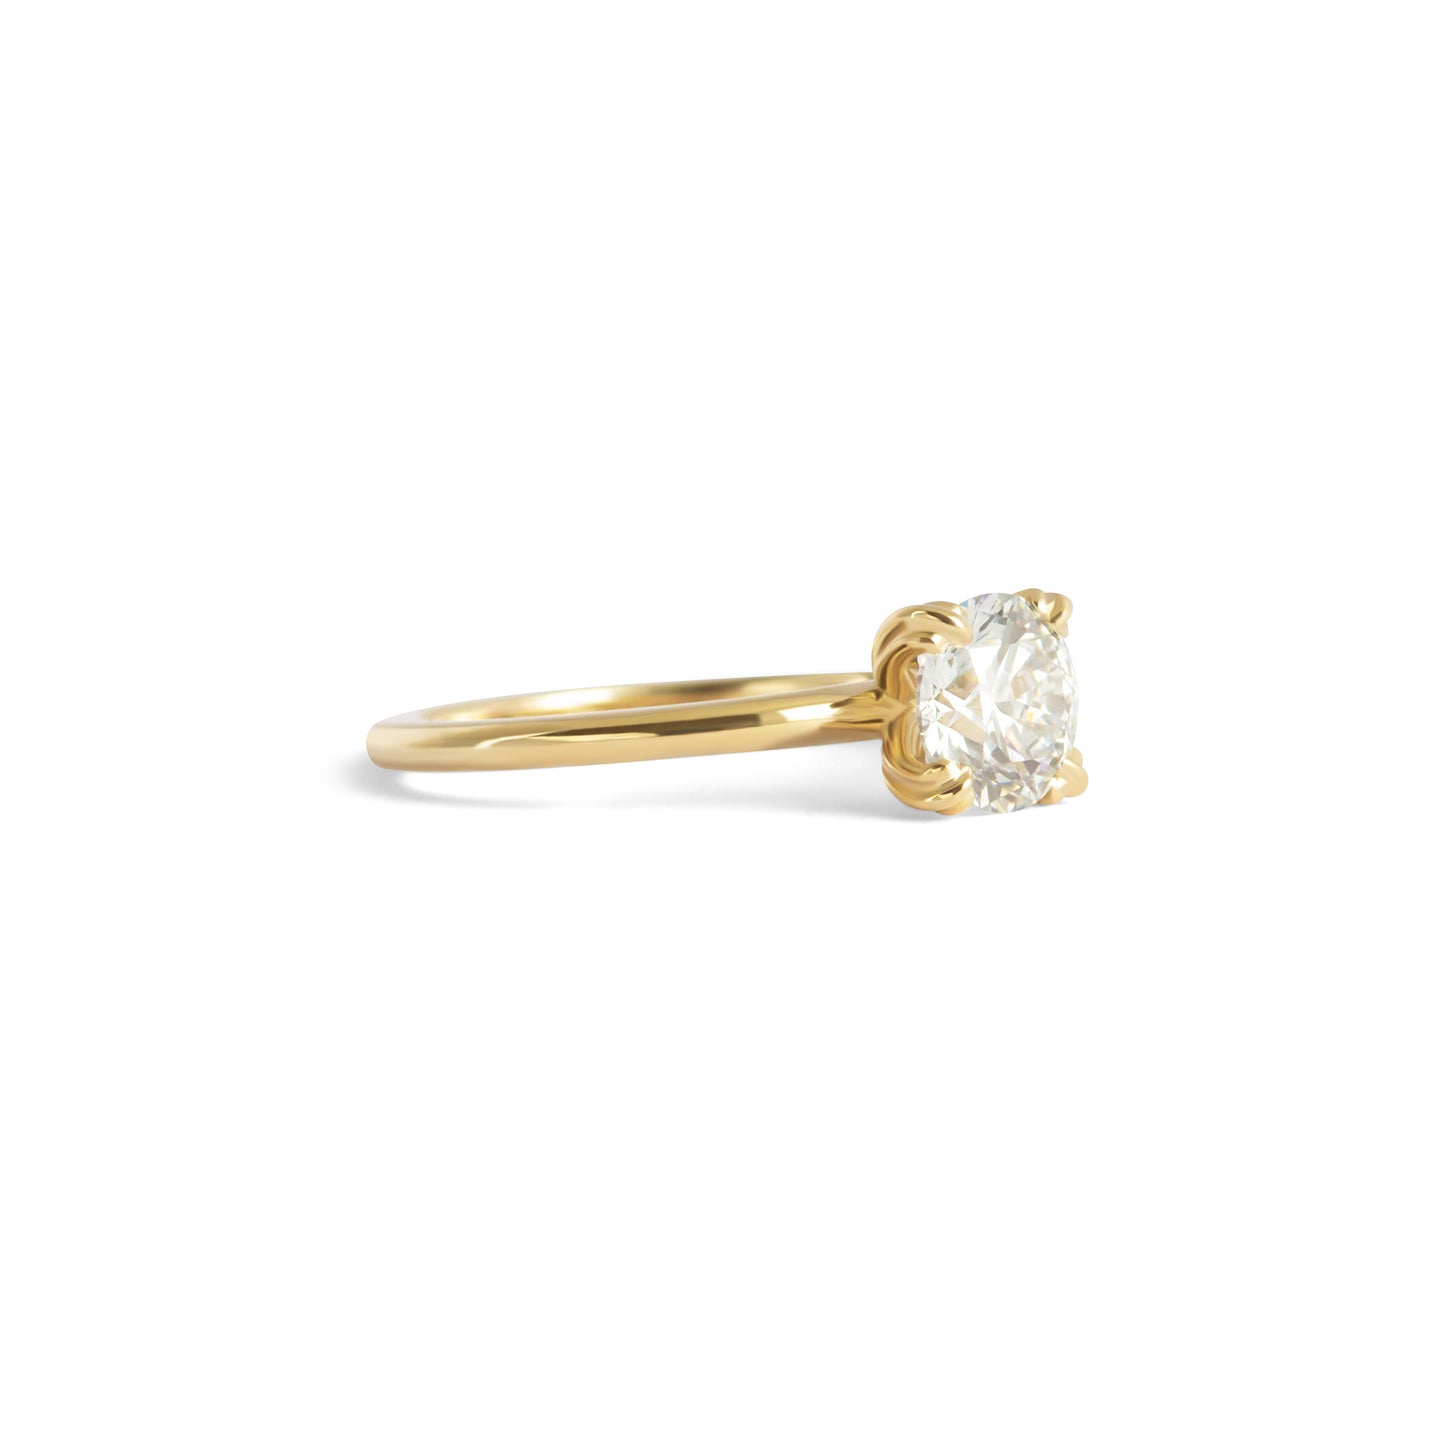 Load image into Gallery viewer, Cornice Prong Ring / Lab Round Diamond 1ct - Goldpoint Studio - Greenpoint, Brooklyn - Fine Jewelry
